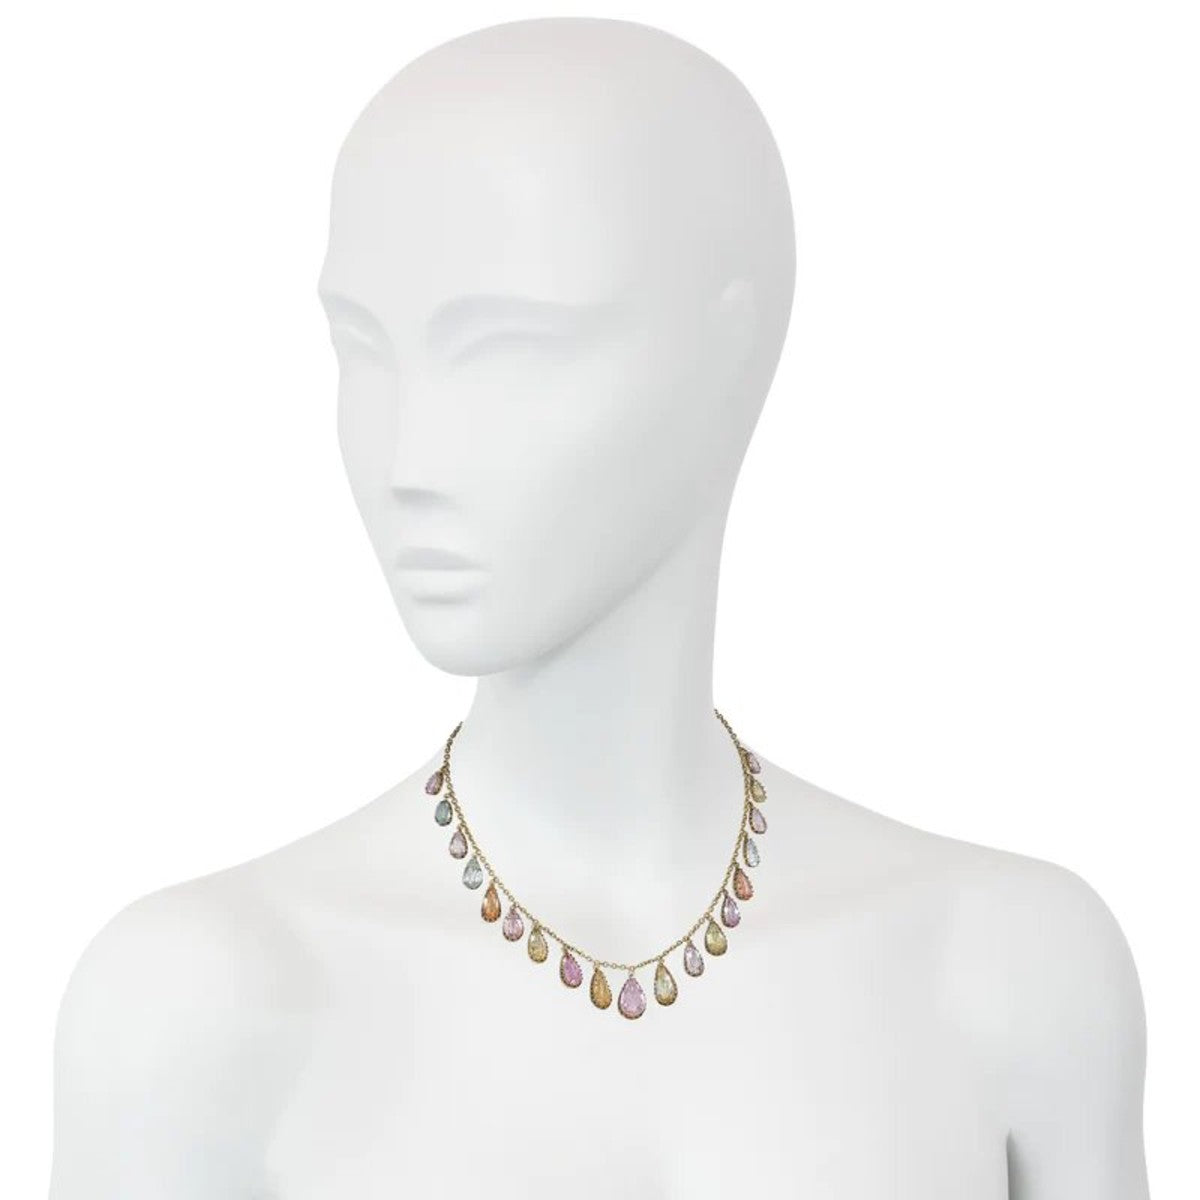 Victorian 14KT Yellow Gold Topaz Fringe Necklace on neck